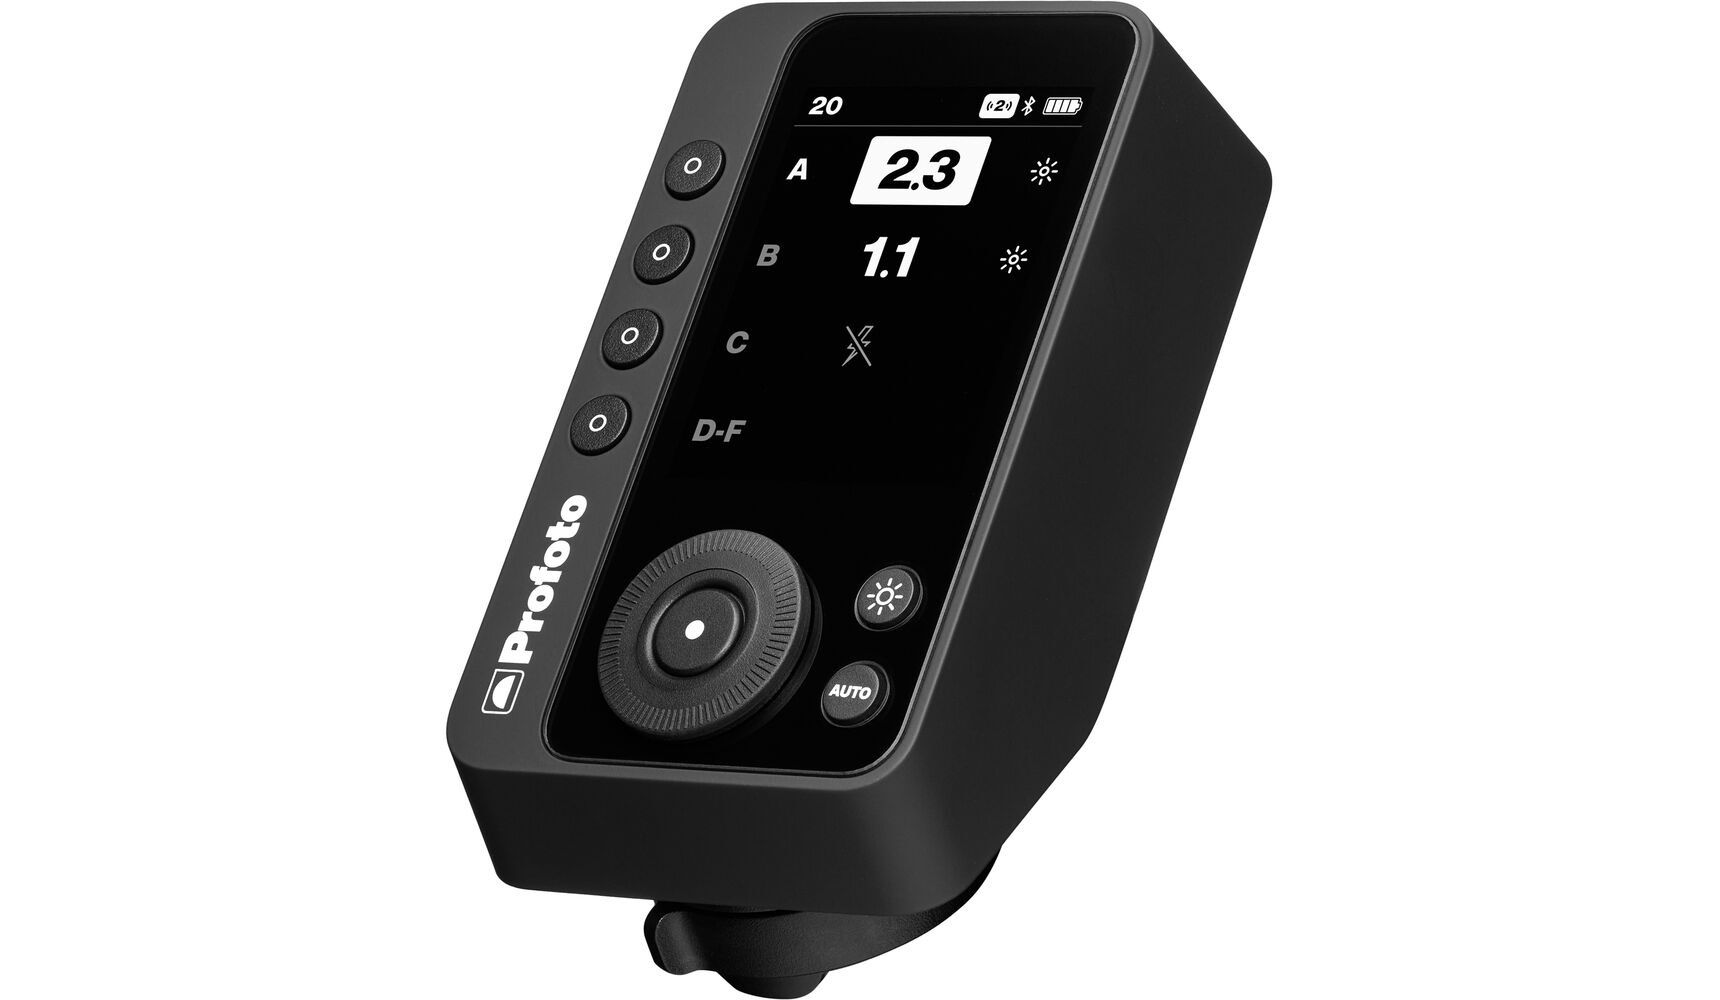 PROFOTO - Connect Pro for LEICA